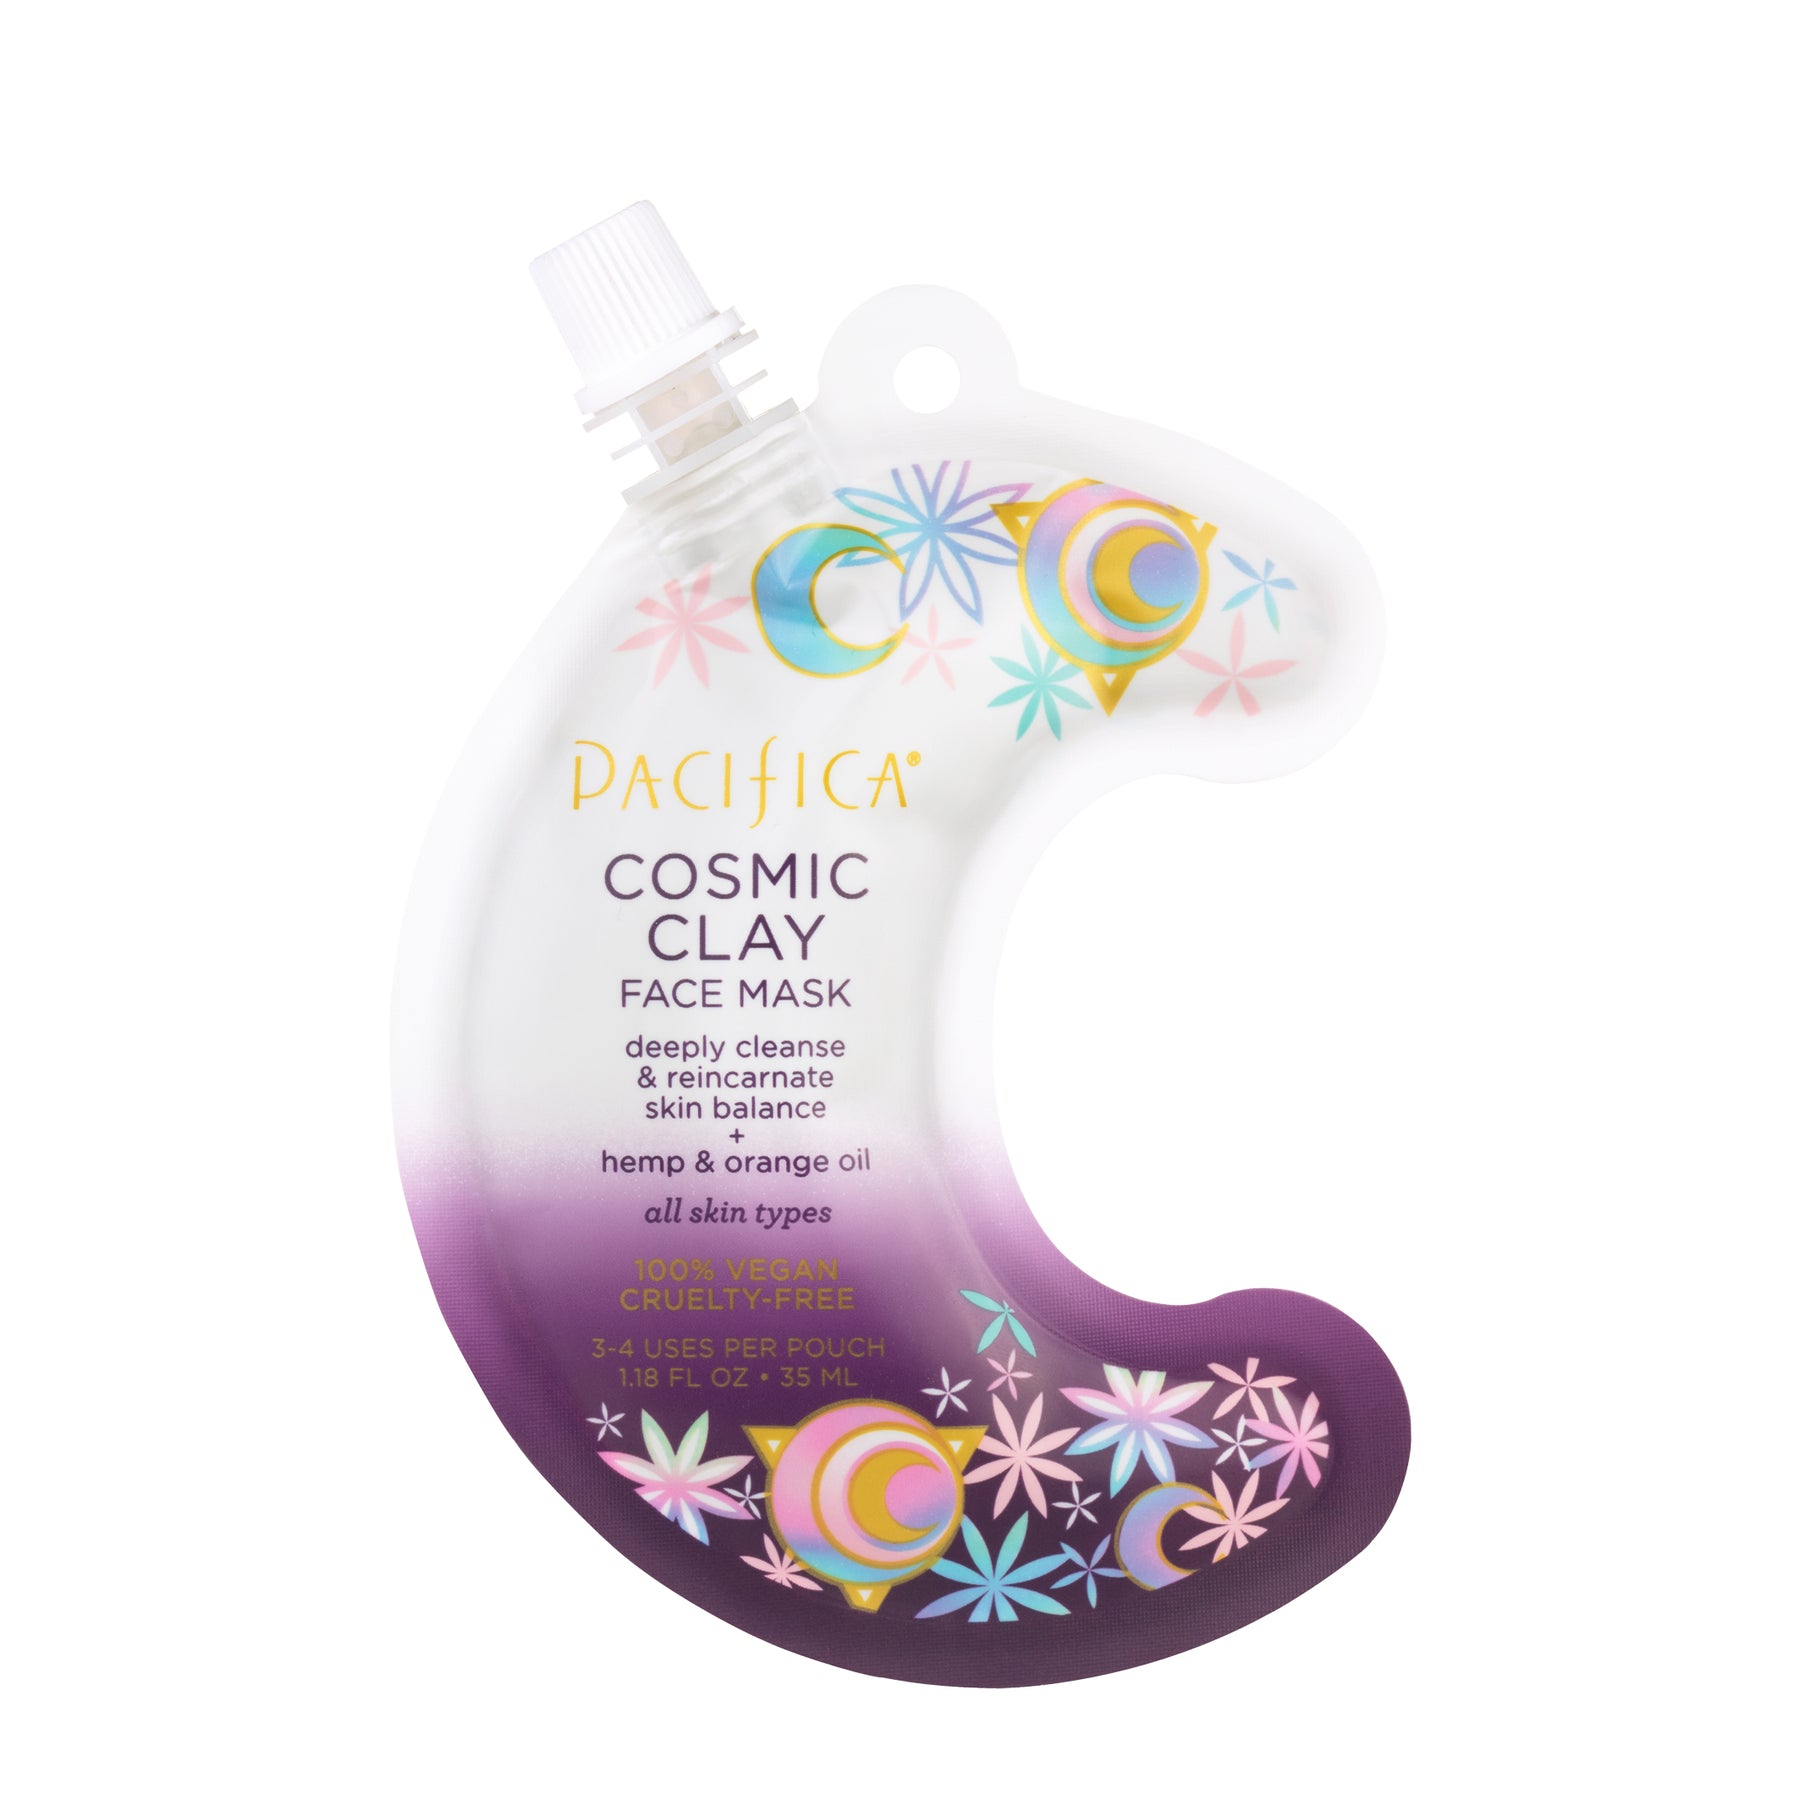 Cosmic Clay Face Mask - Skin Care - Pacifica Beauty